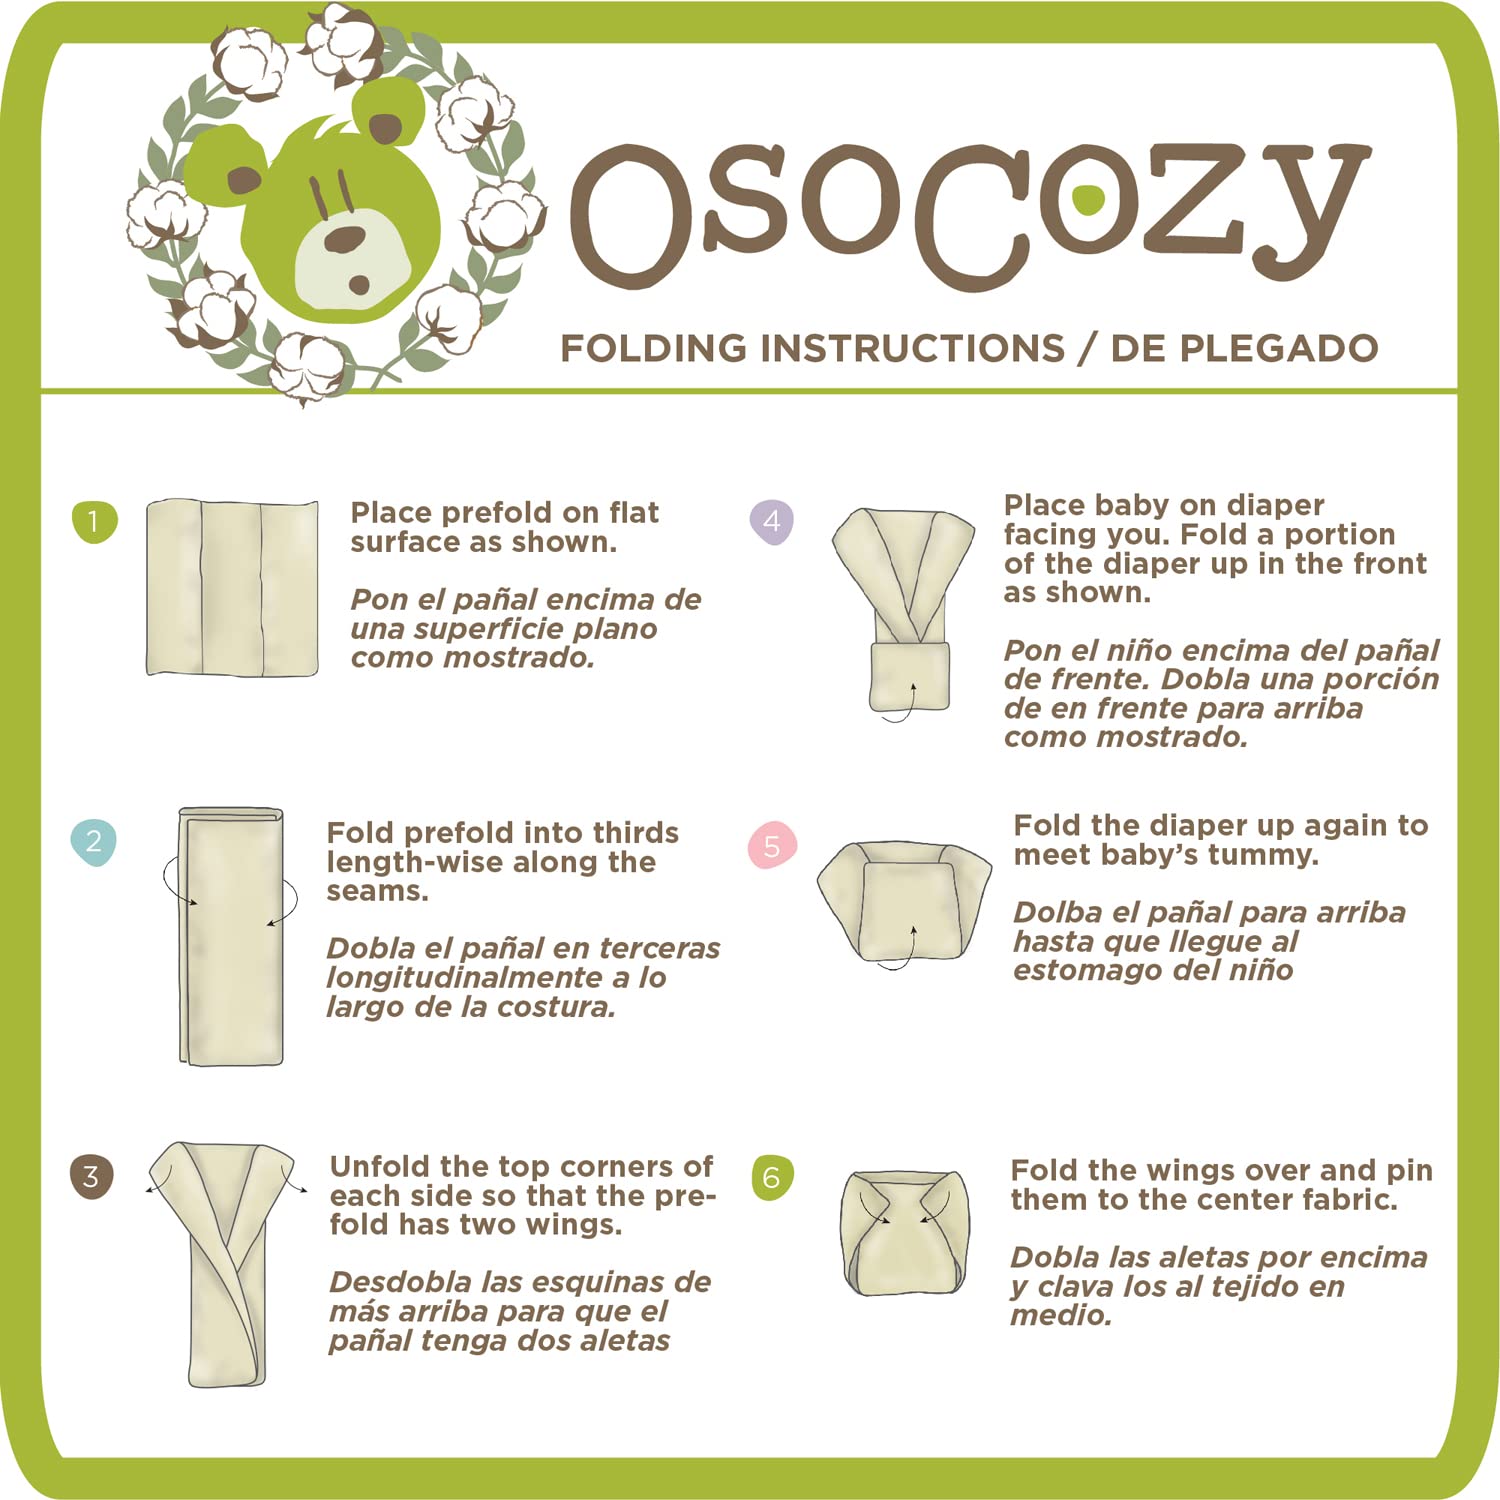 OsoCozy Organic Cotton Prefold Cloth Diapers Traditional Fit Small 4x8x4 Layering (6pk) - Super-Soft, Thick, Absorbent, Durable and Ecologically Friendlier. Unbleached Natural Color, Fits 7-15 lbs.